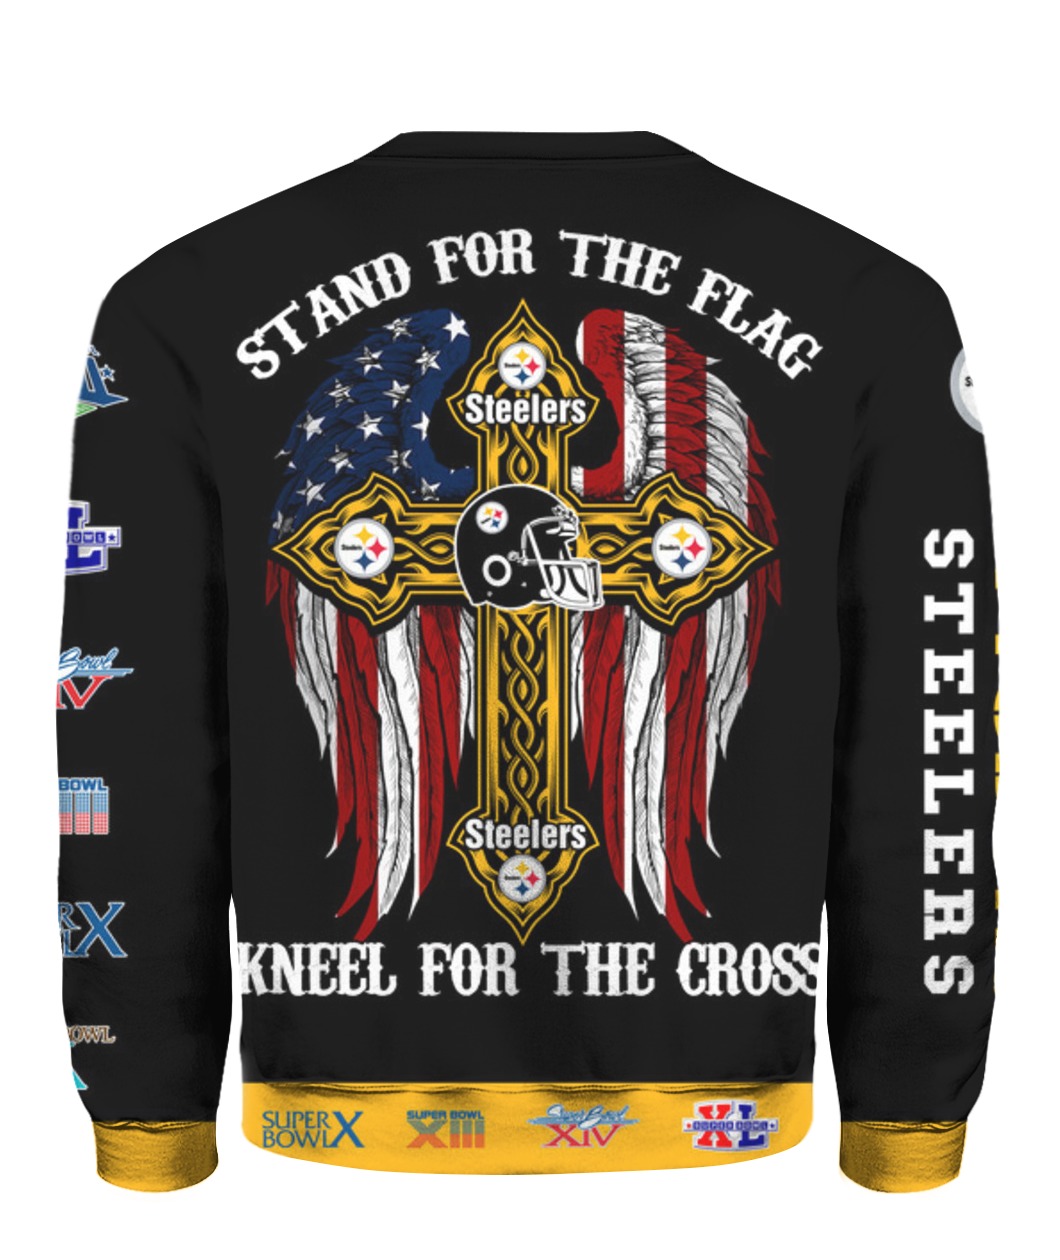 Stand for the flag kneel for the cross pittsburgh steelers all over print sweatshirt - back